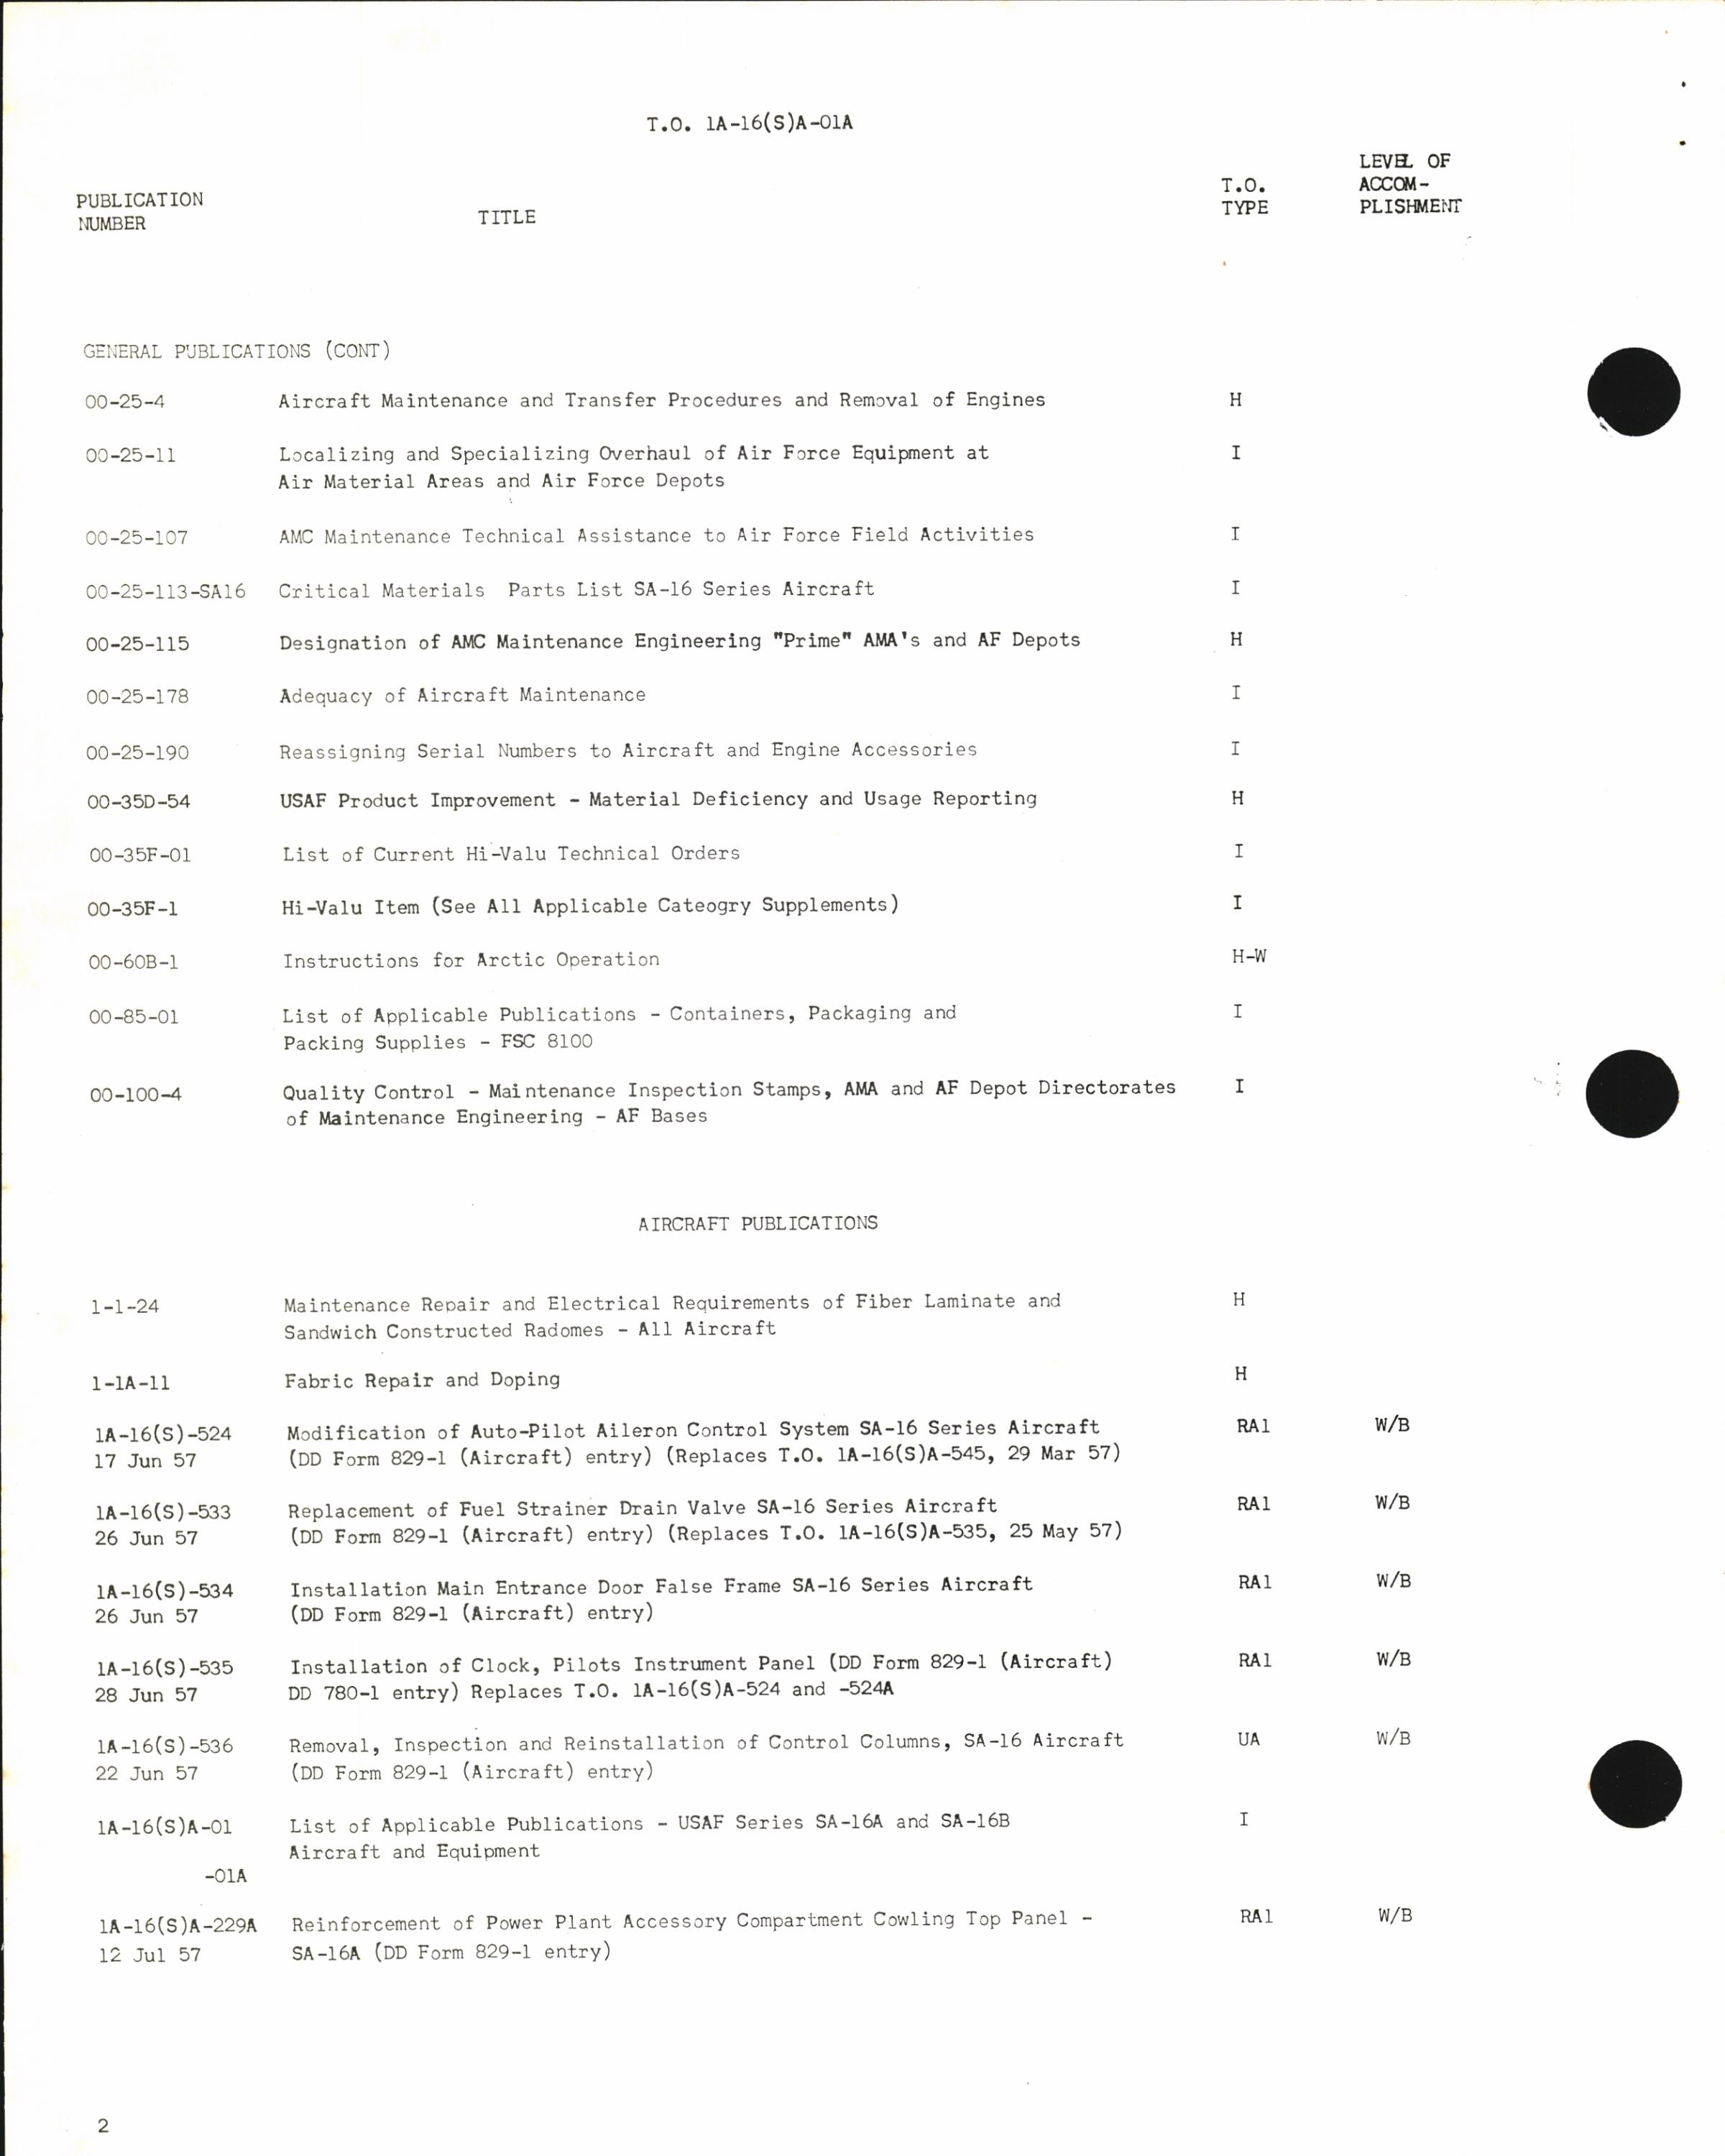 Sample page 4 from AirCorps Library document: Cumulative Supplement List of Applicable Publications for SA-16A and SA-16B Aircraft and Equipment